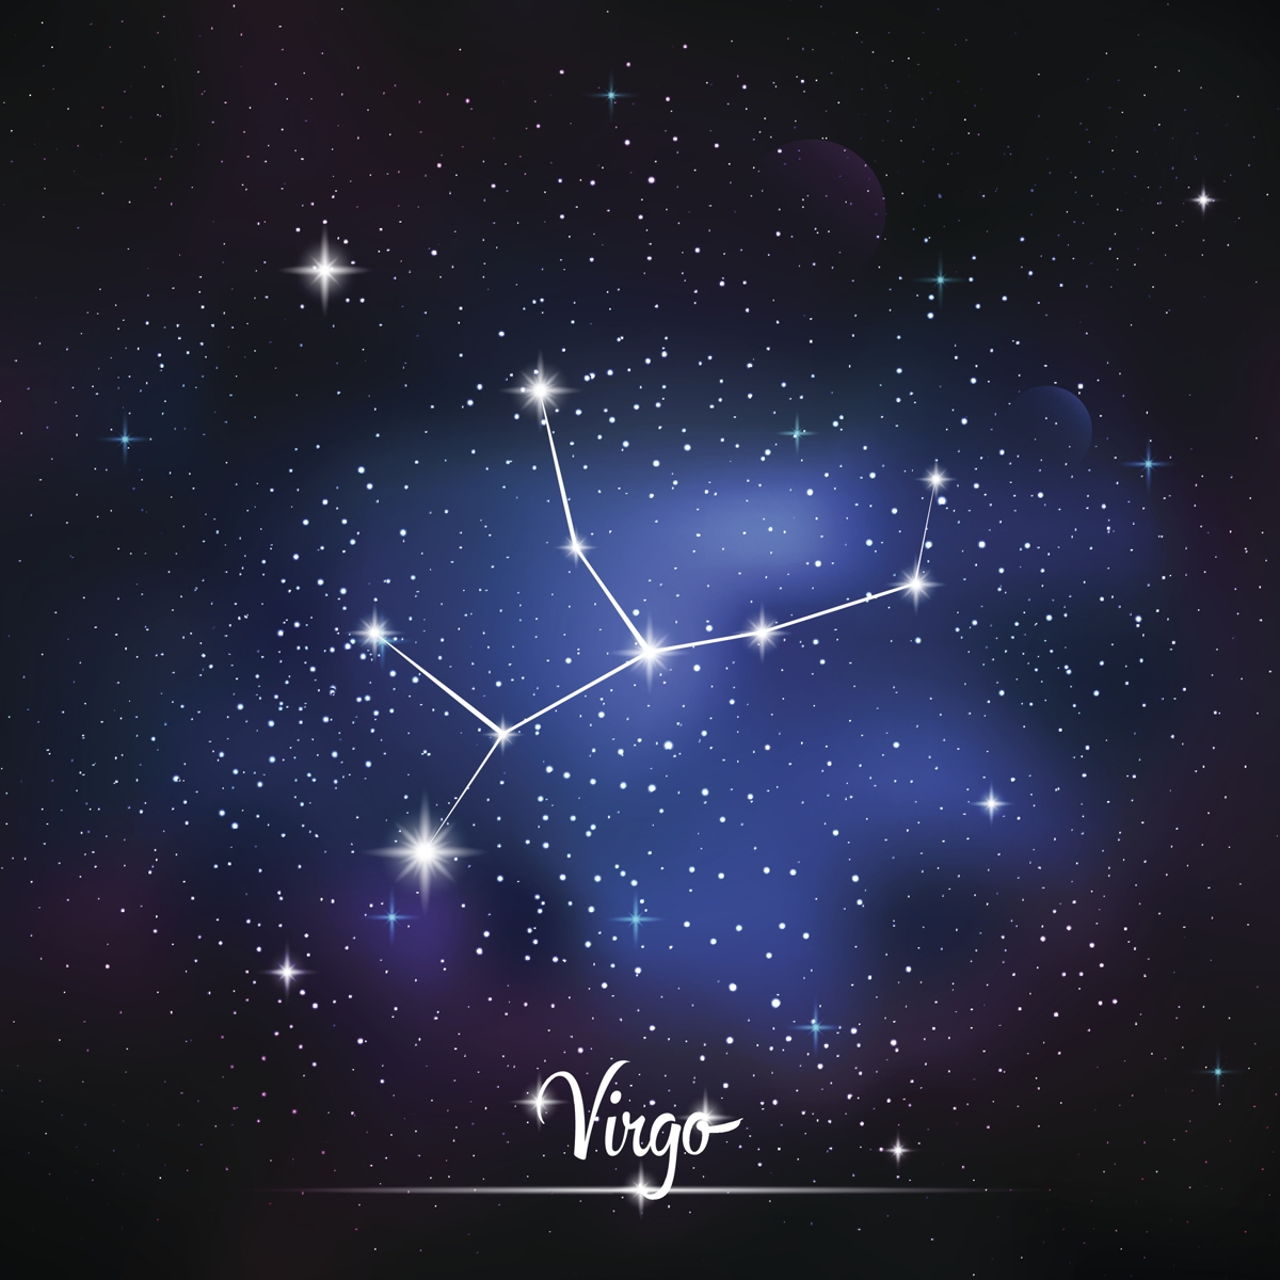 Everything You Need to Know About the Virgo Constellation - Universavvy